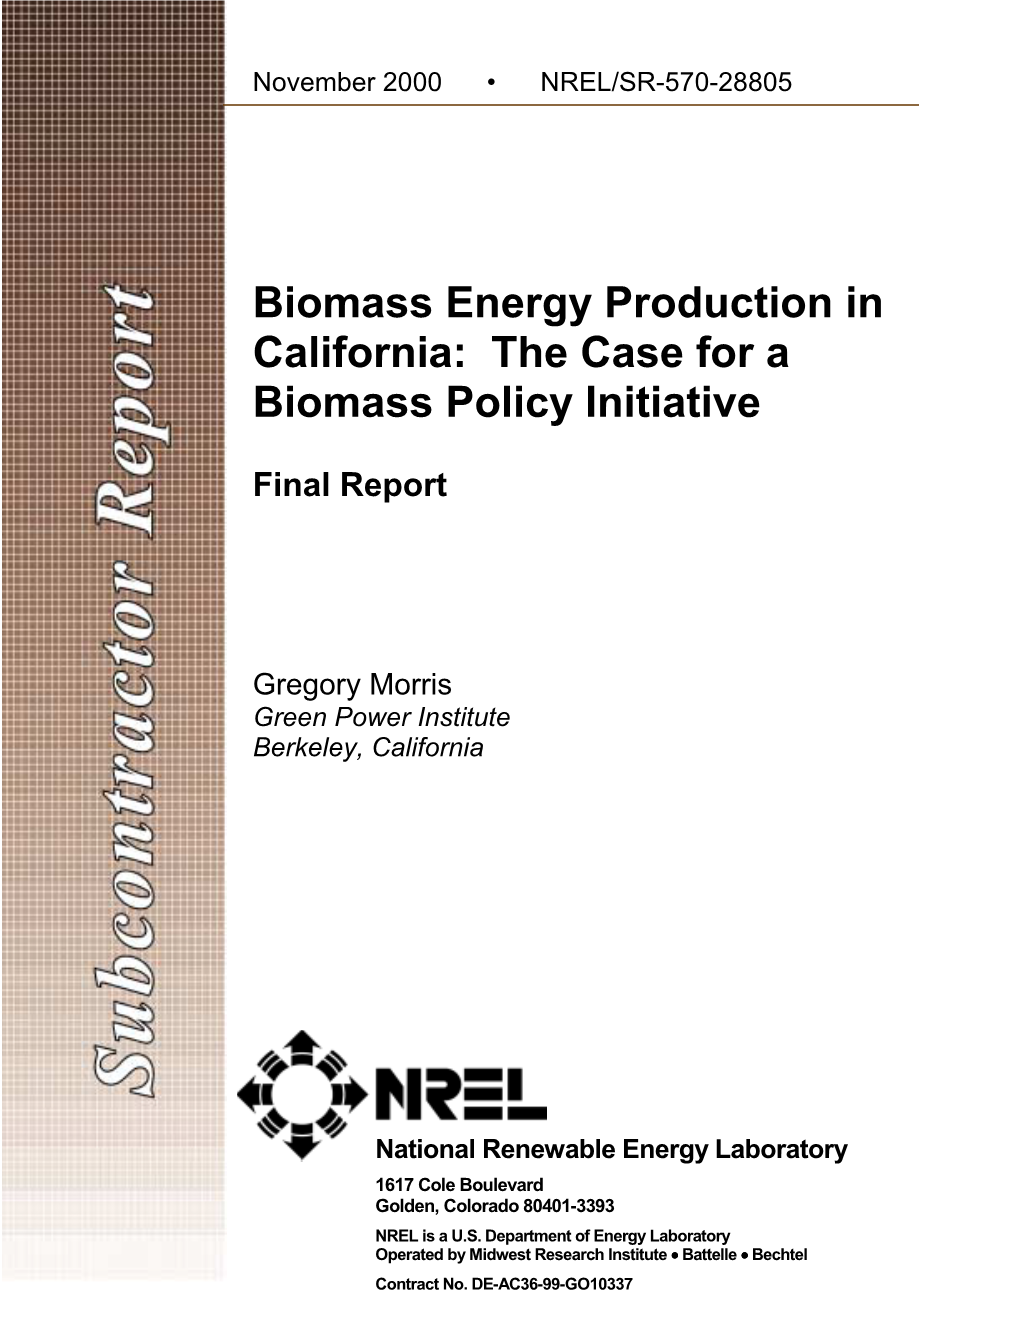 Biomass Energy Production in California: the Case for a Biomass Policy Initiative